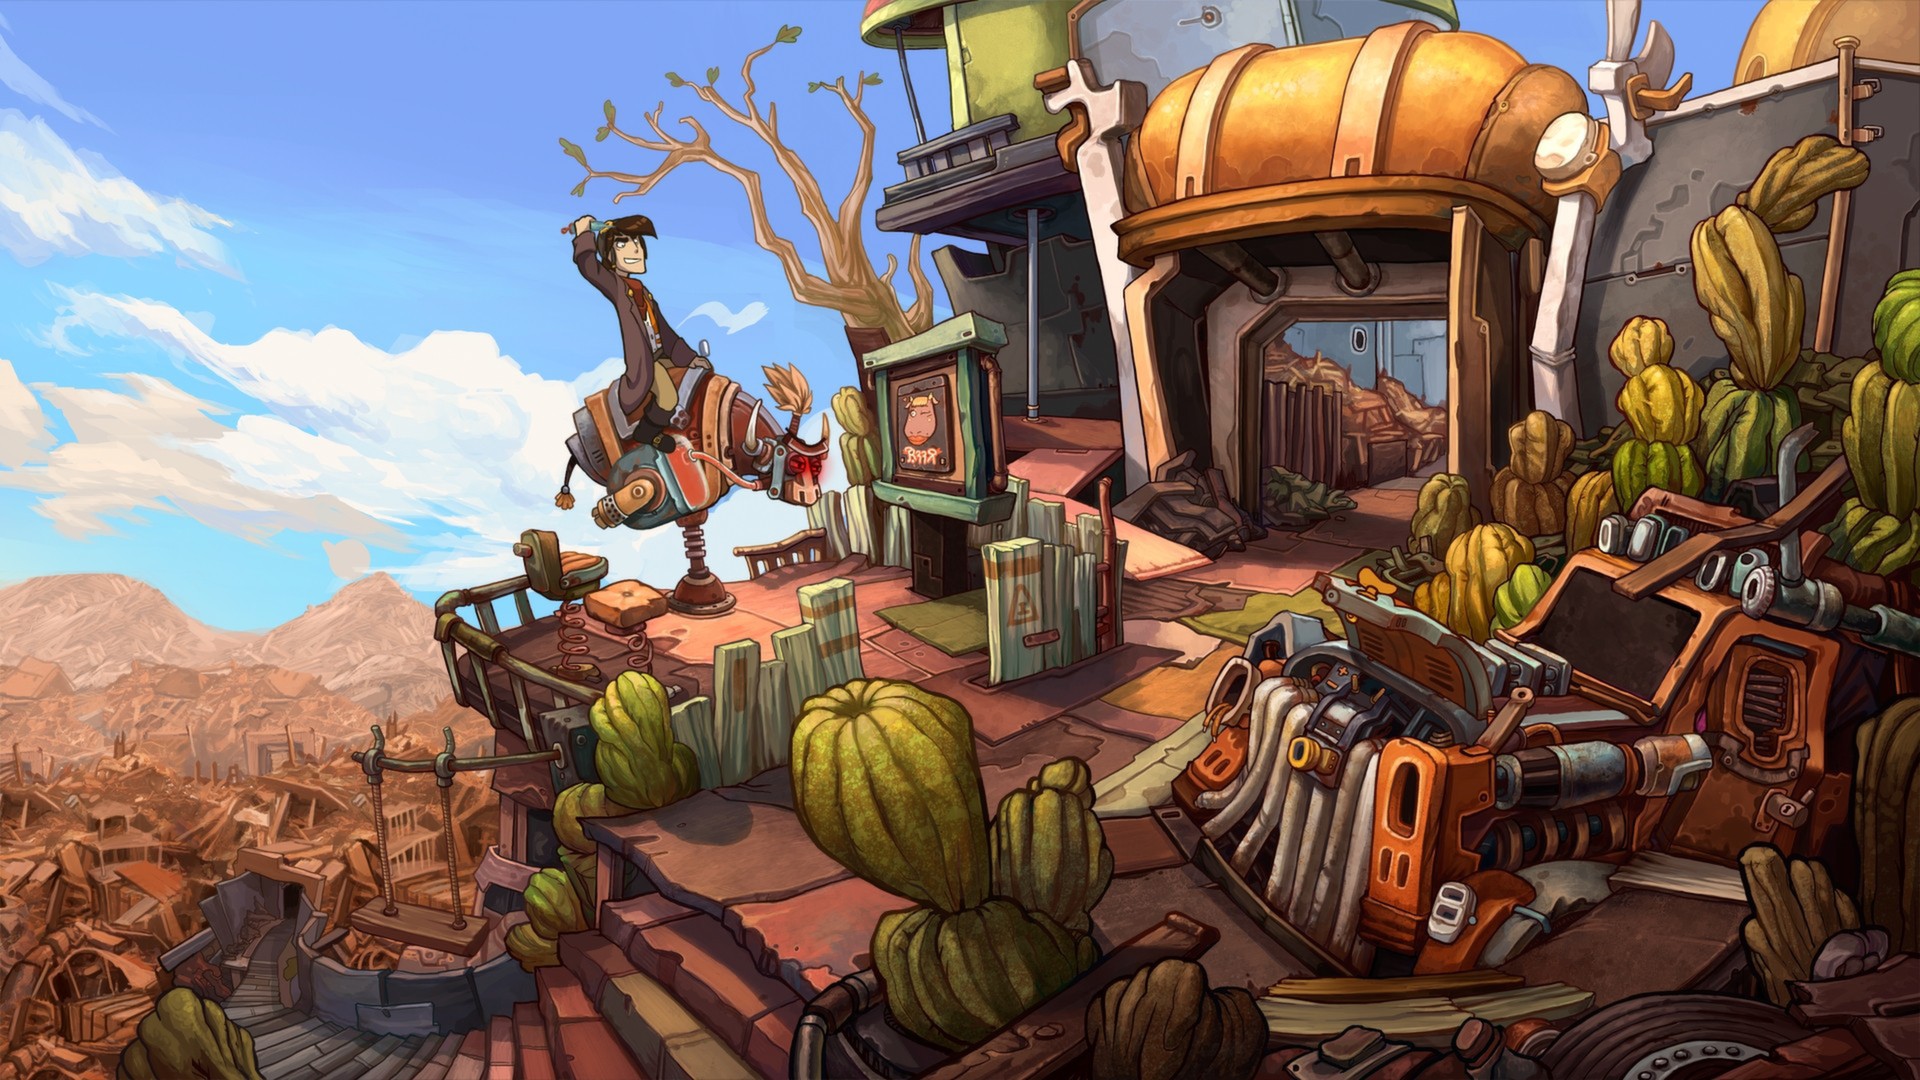 Deponia on Steam